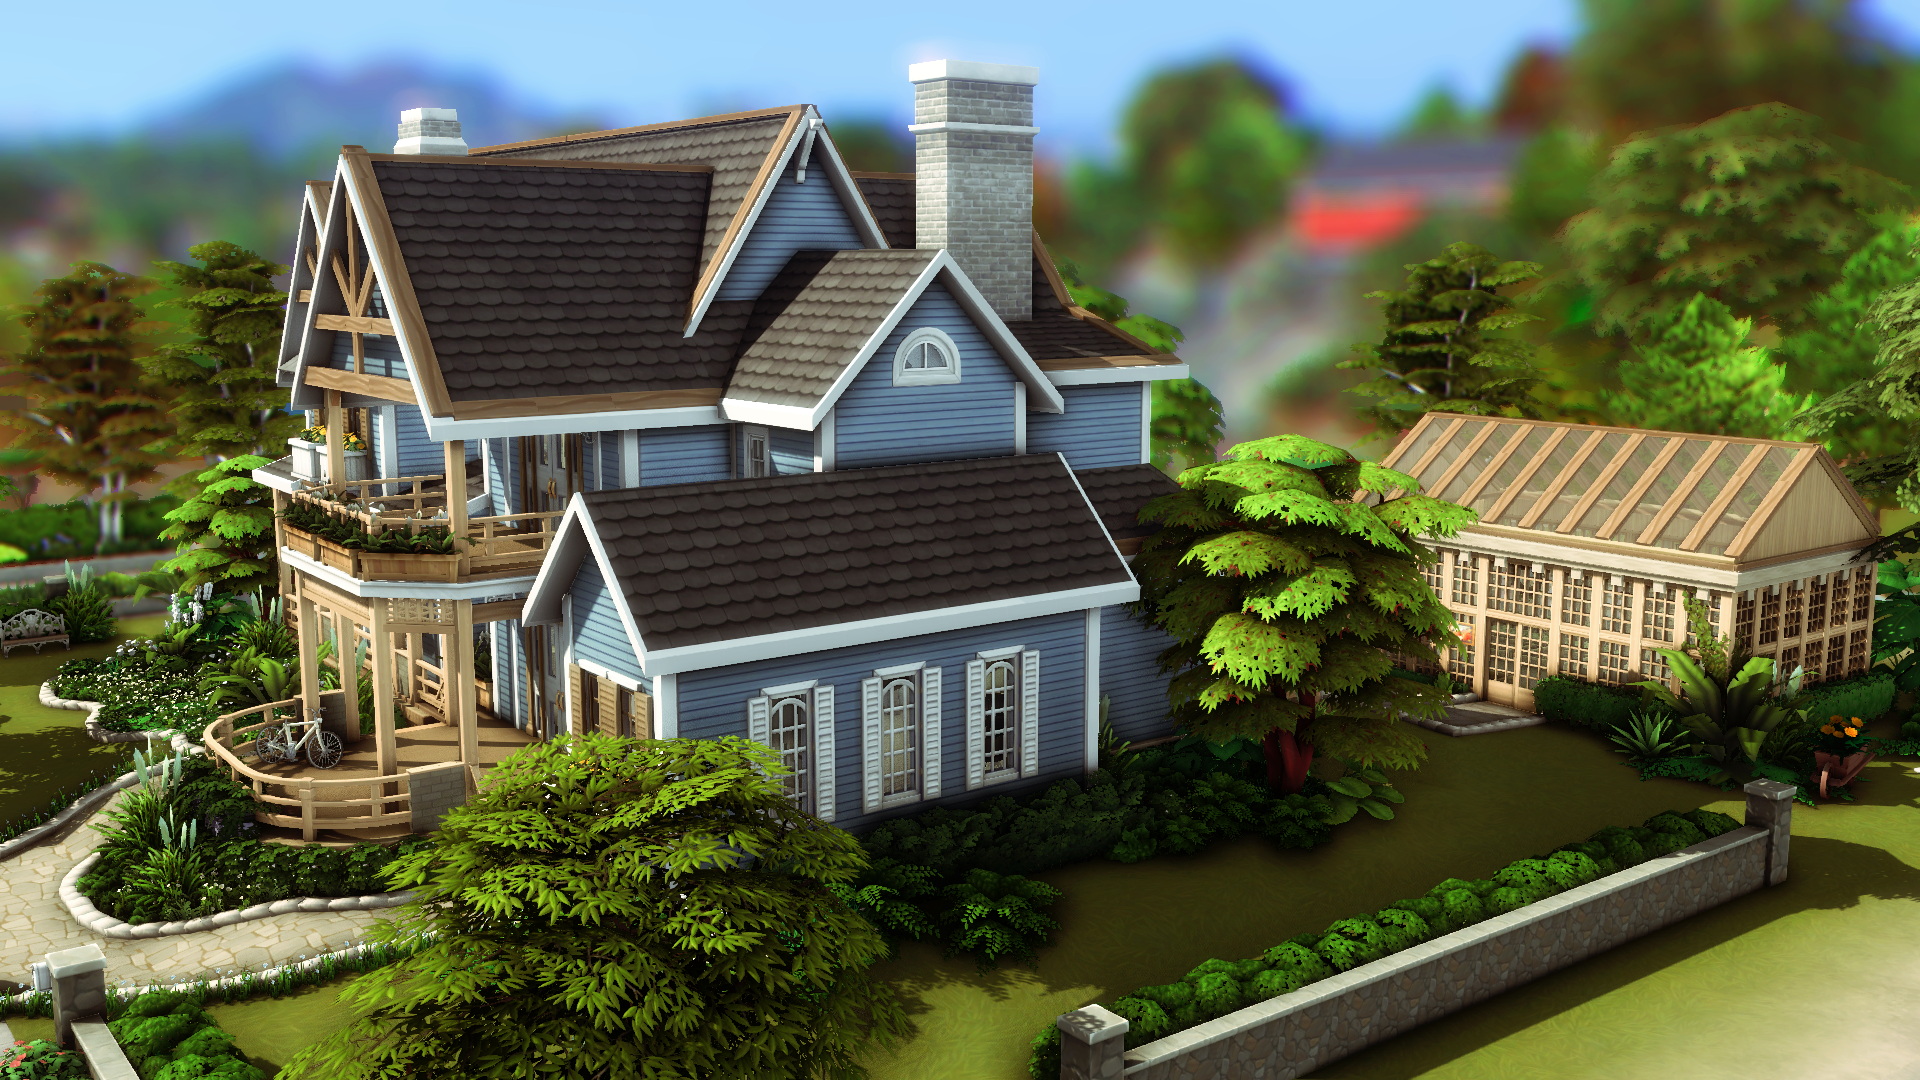 Familiar Country House by plumbobkingdom at Mod The Sims 4 » Sims 4 Updates